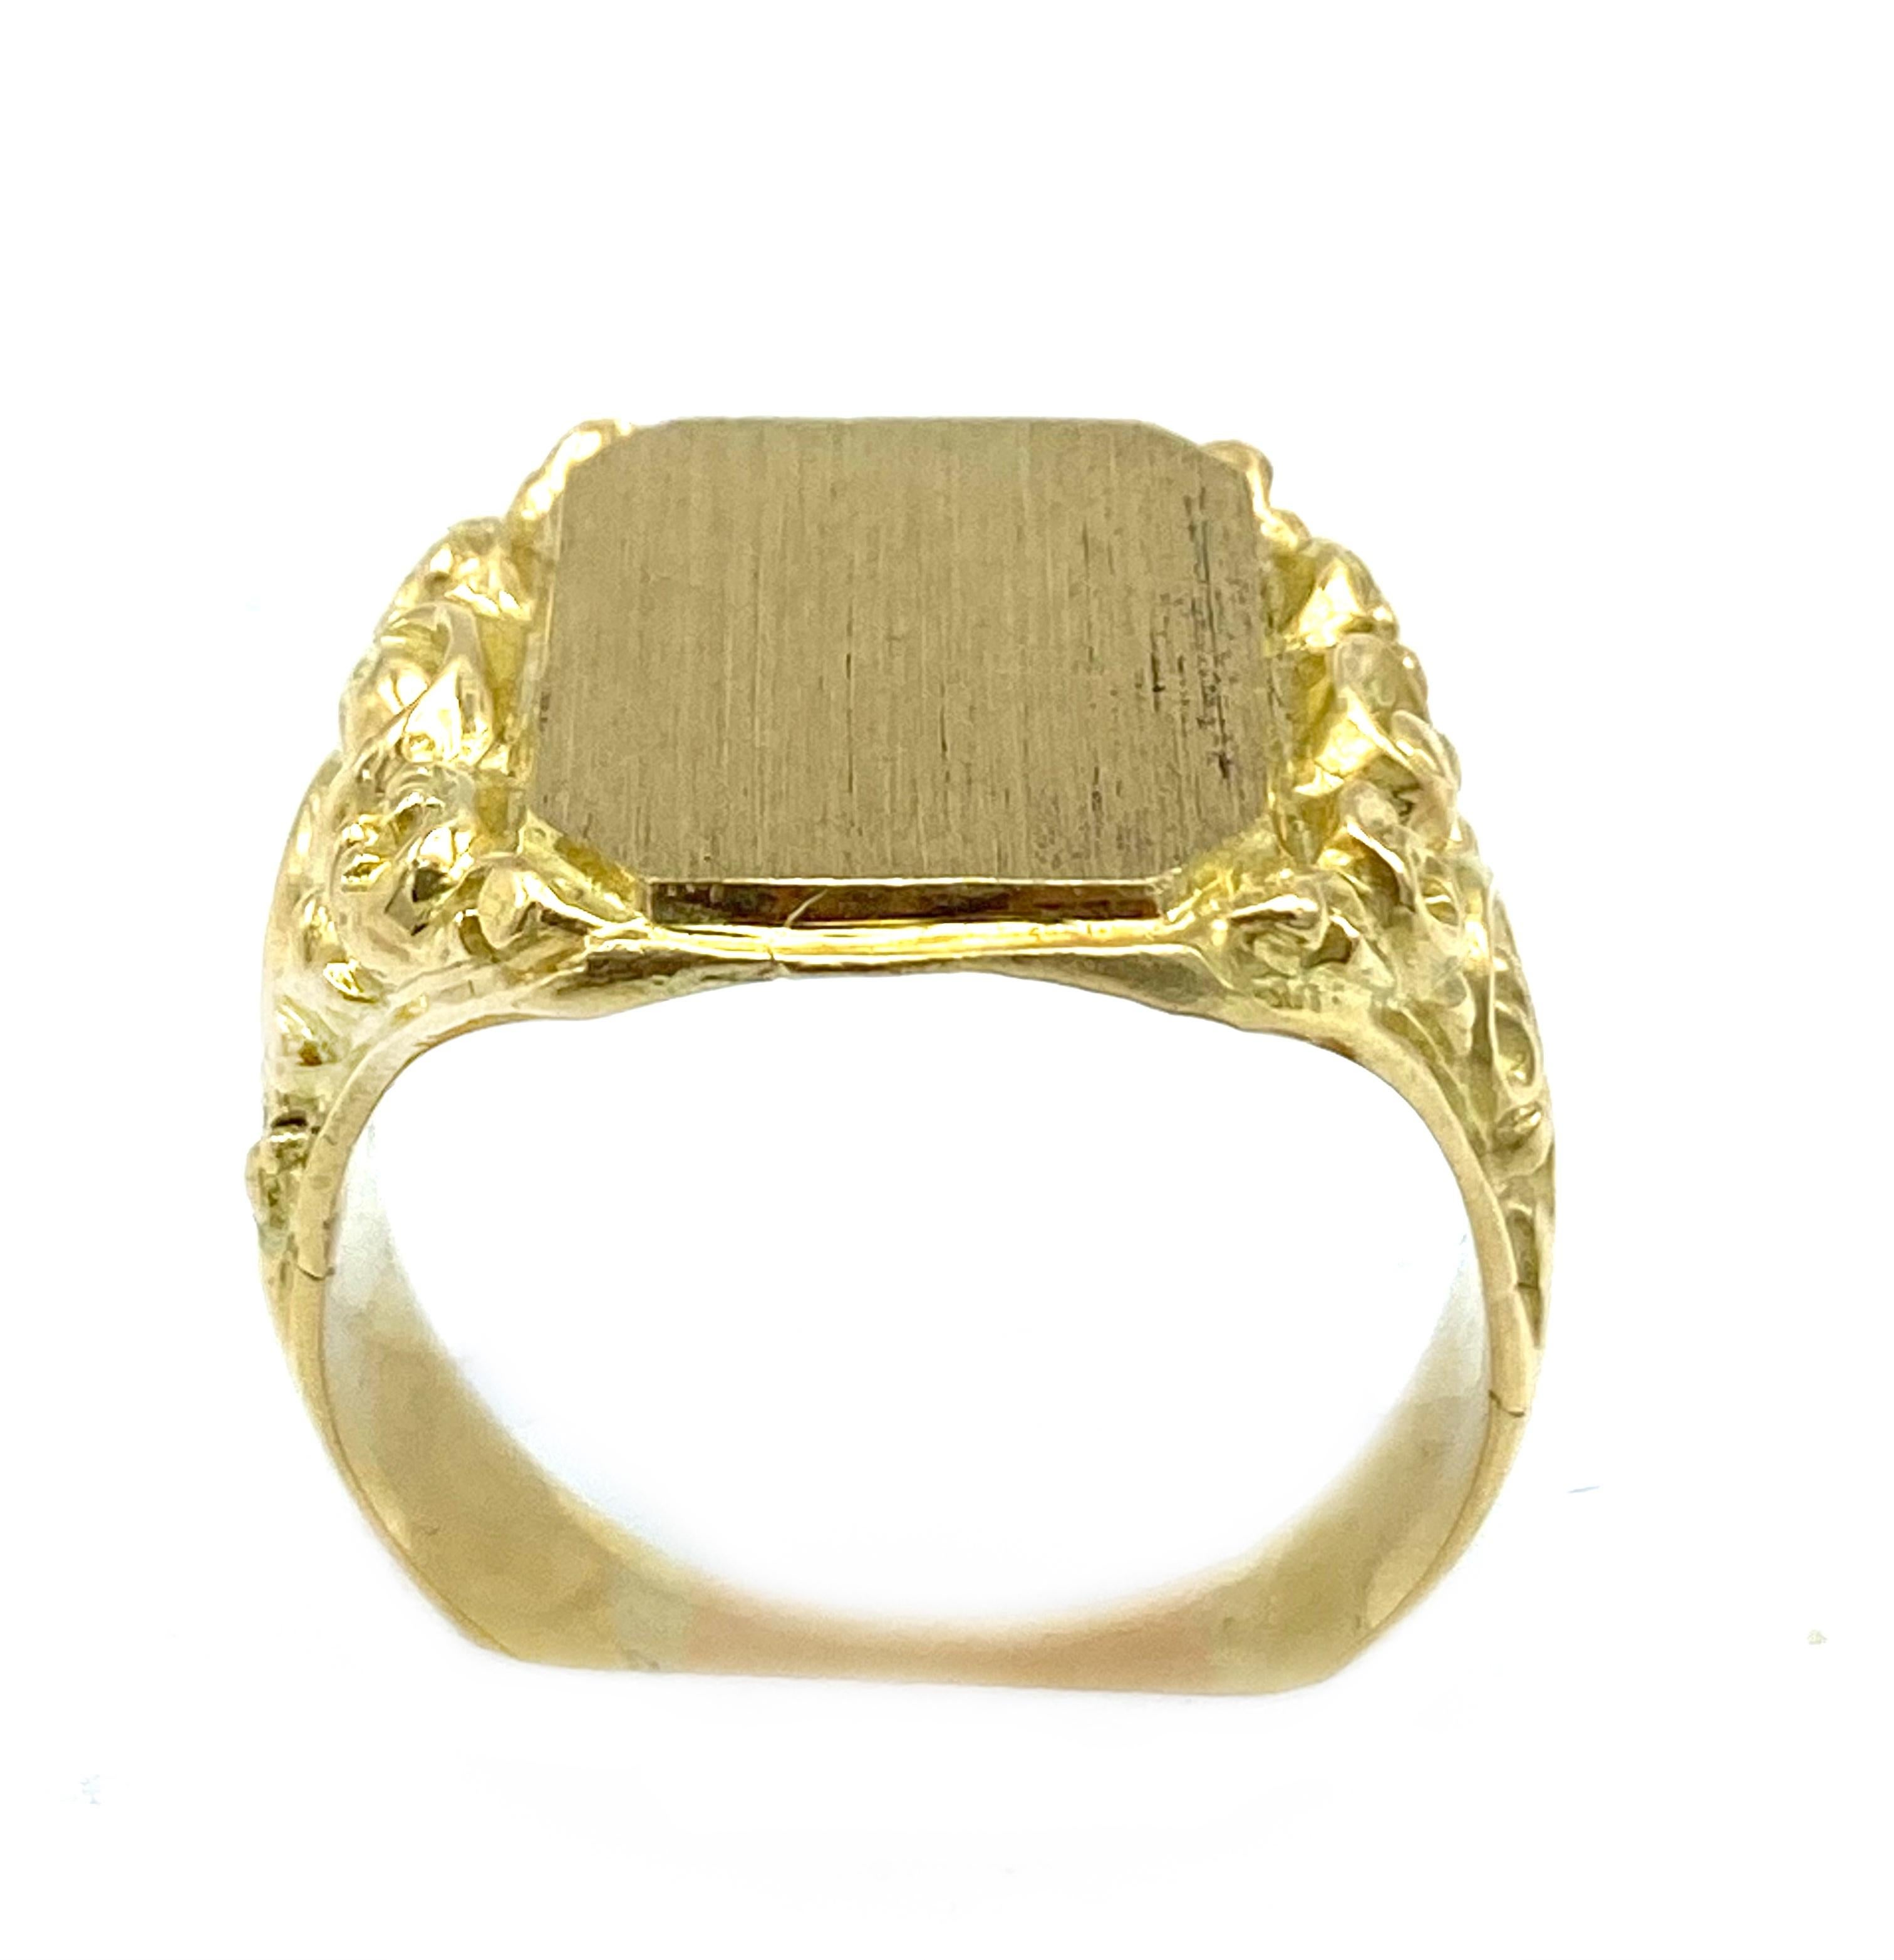 Product details:

The ring is made out of 14 karat yellow gold, featuring plain front and floral motif on the sides.

Total weight is 20.0 grams. 
Measurements: 1- 1/16